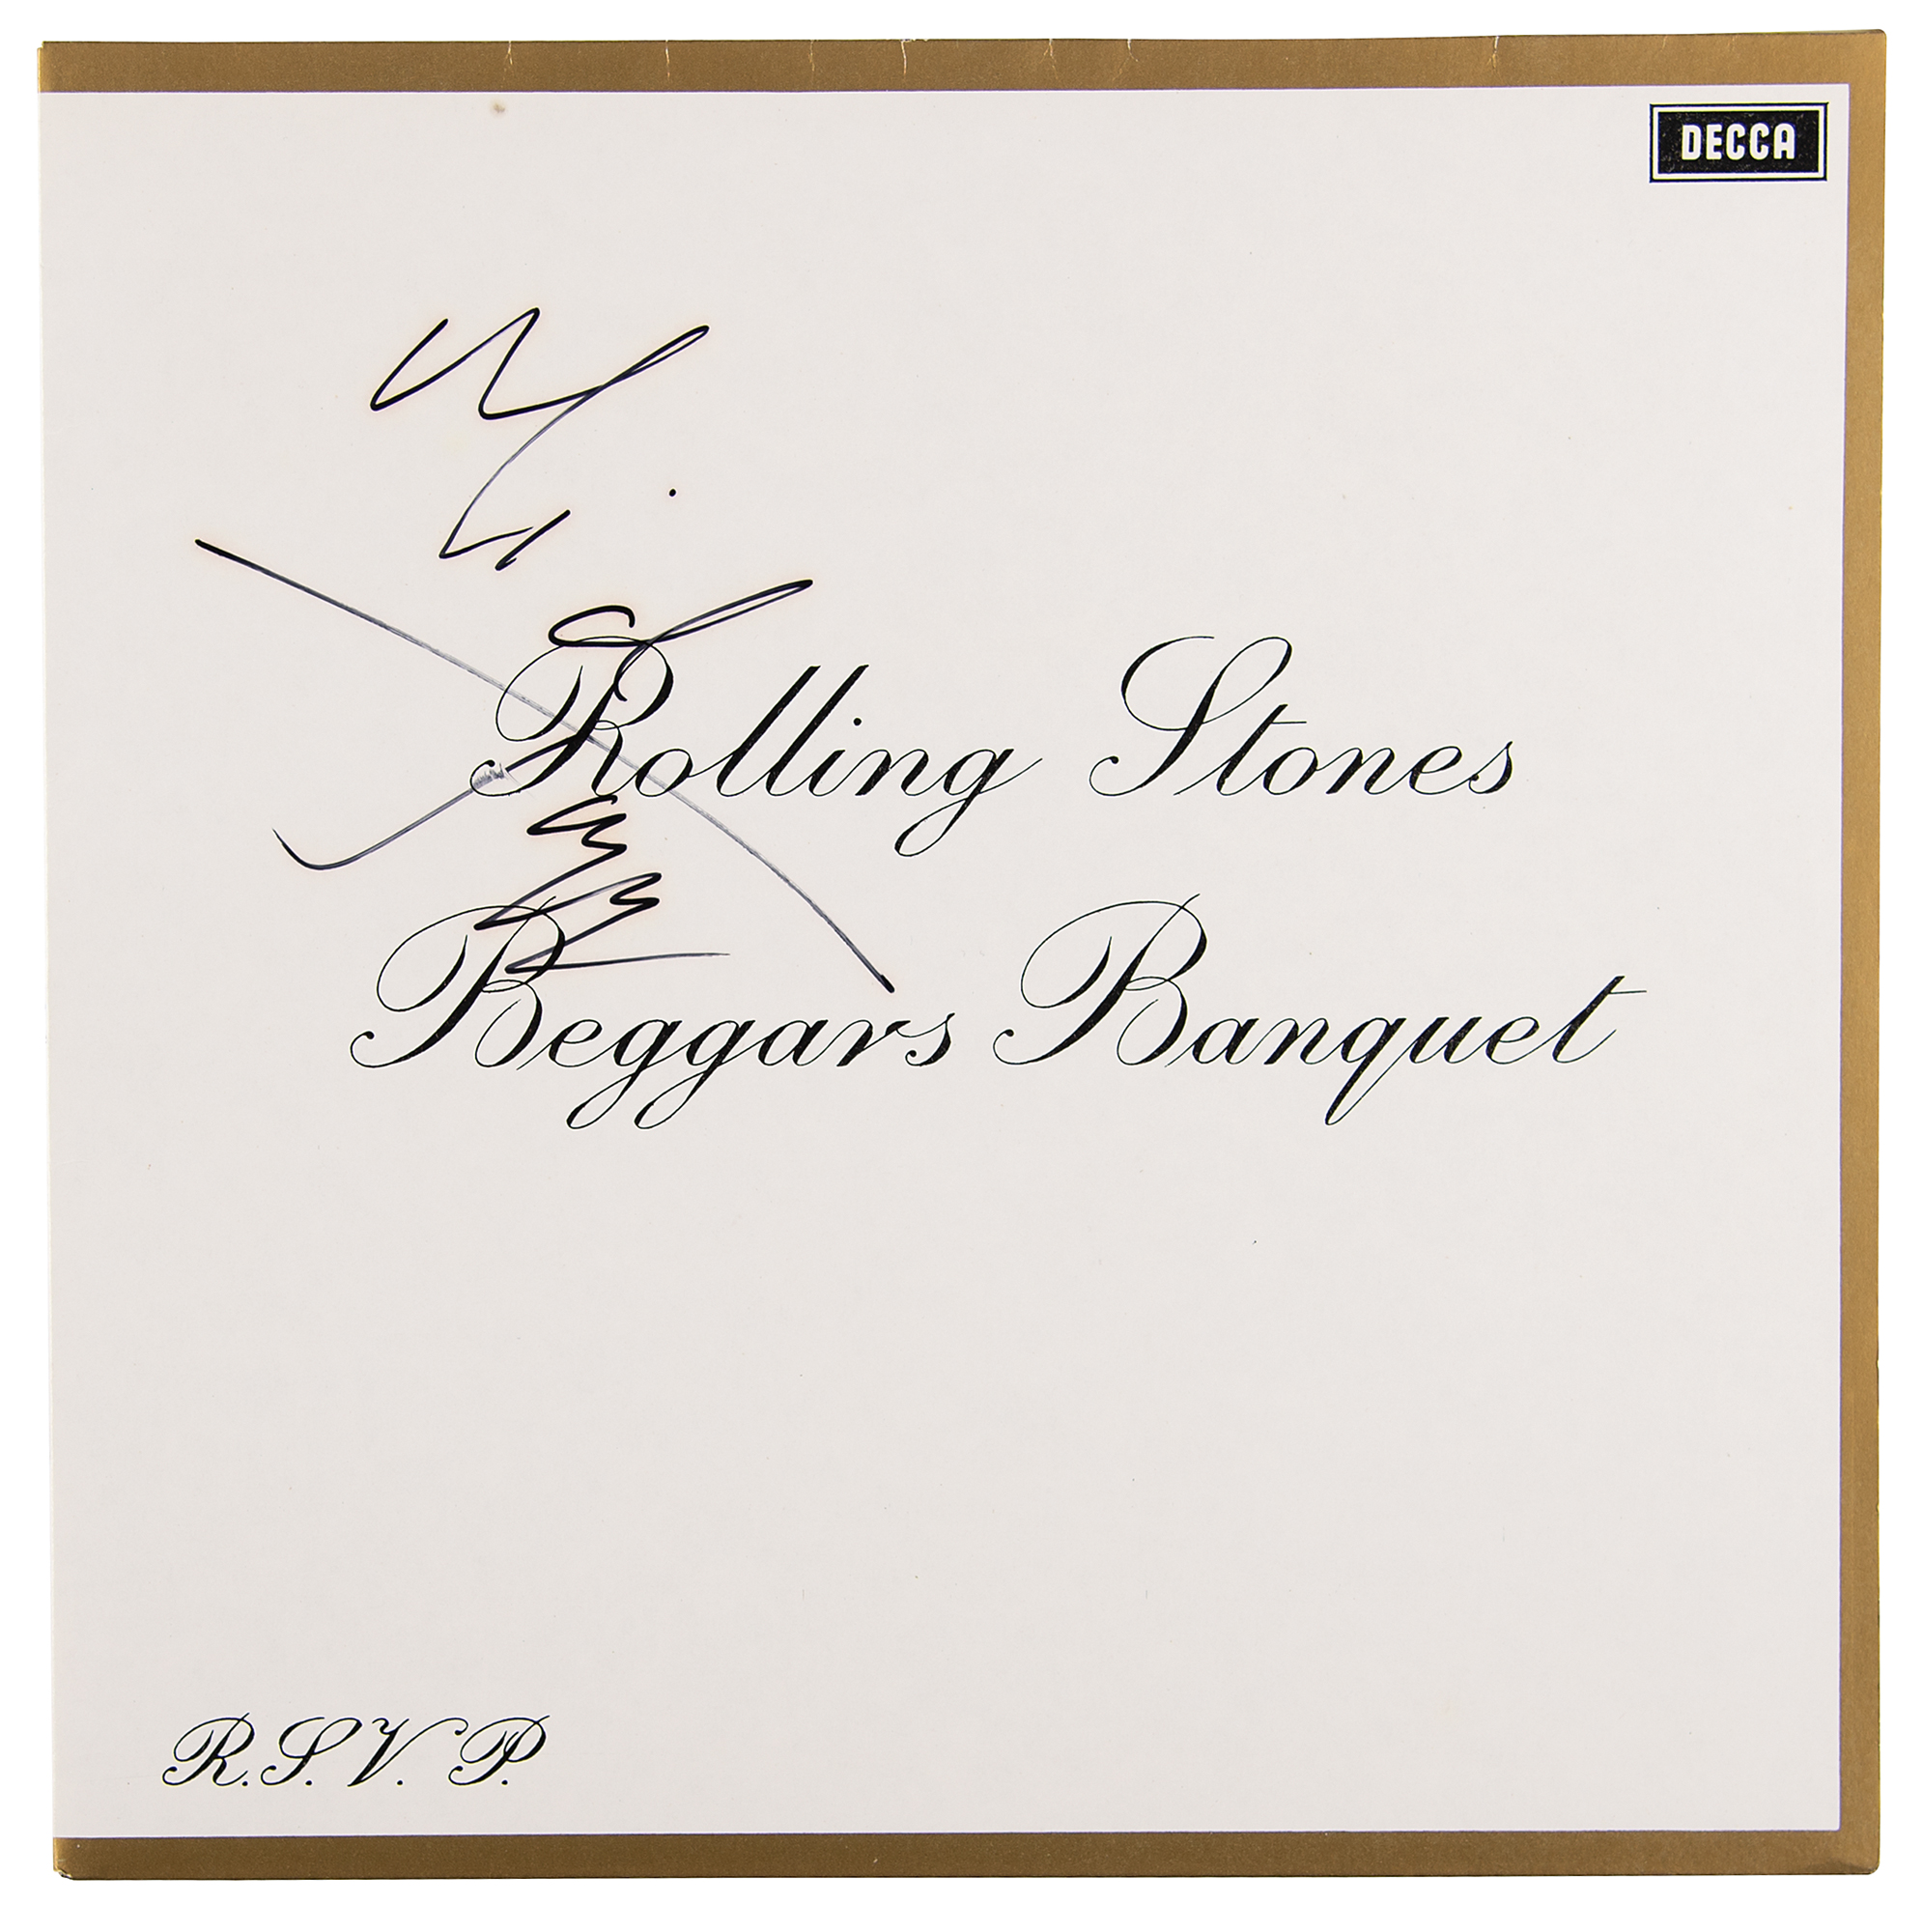 Mick Jagger Signed Rolling Stones Album -Beggars Banquet | RR Auction